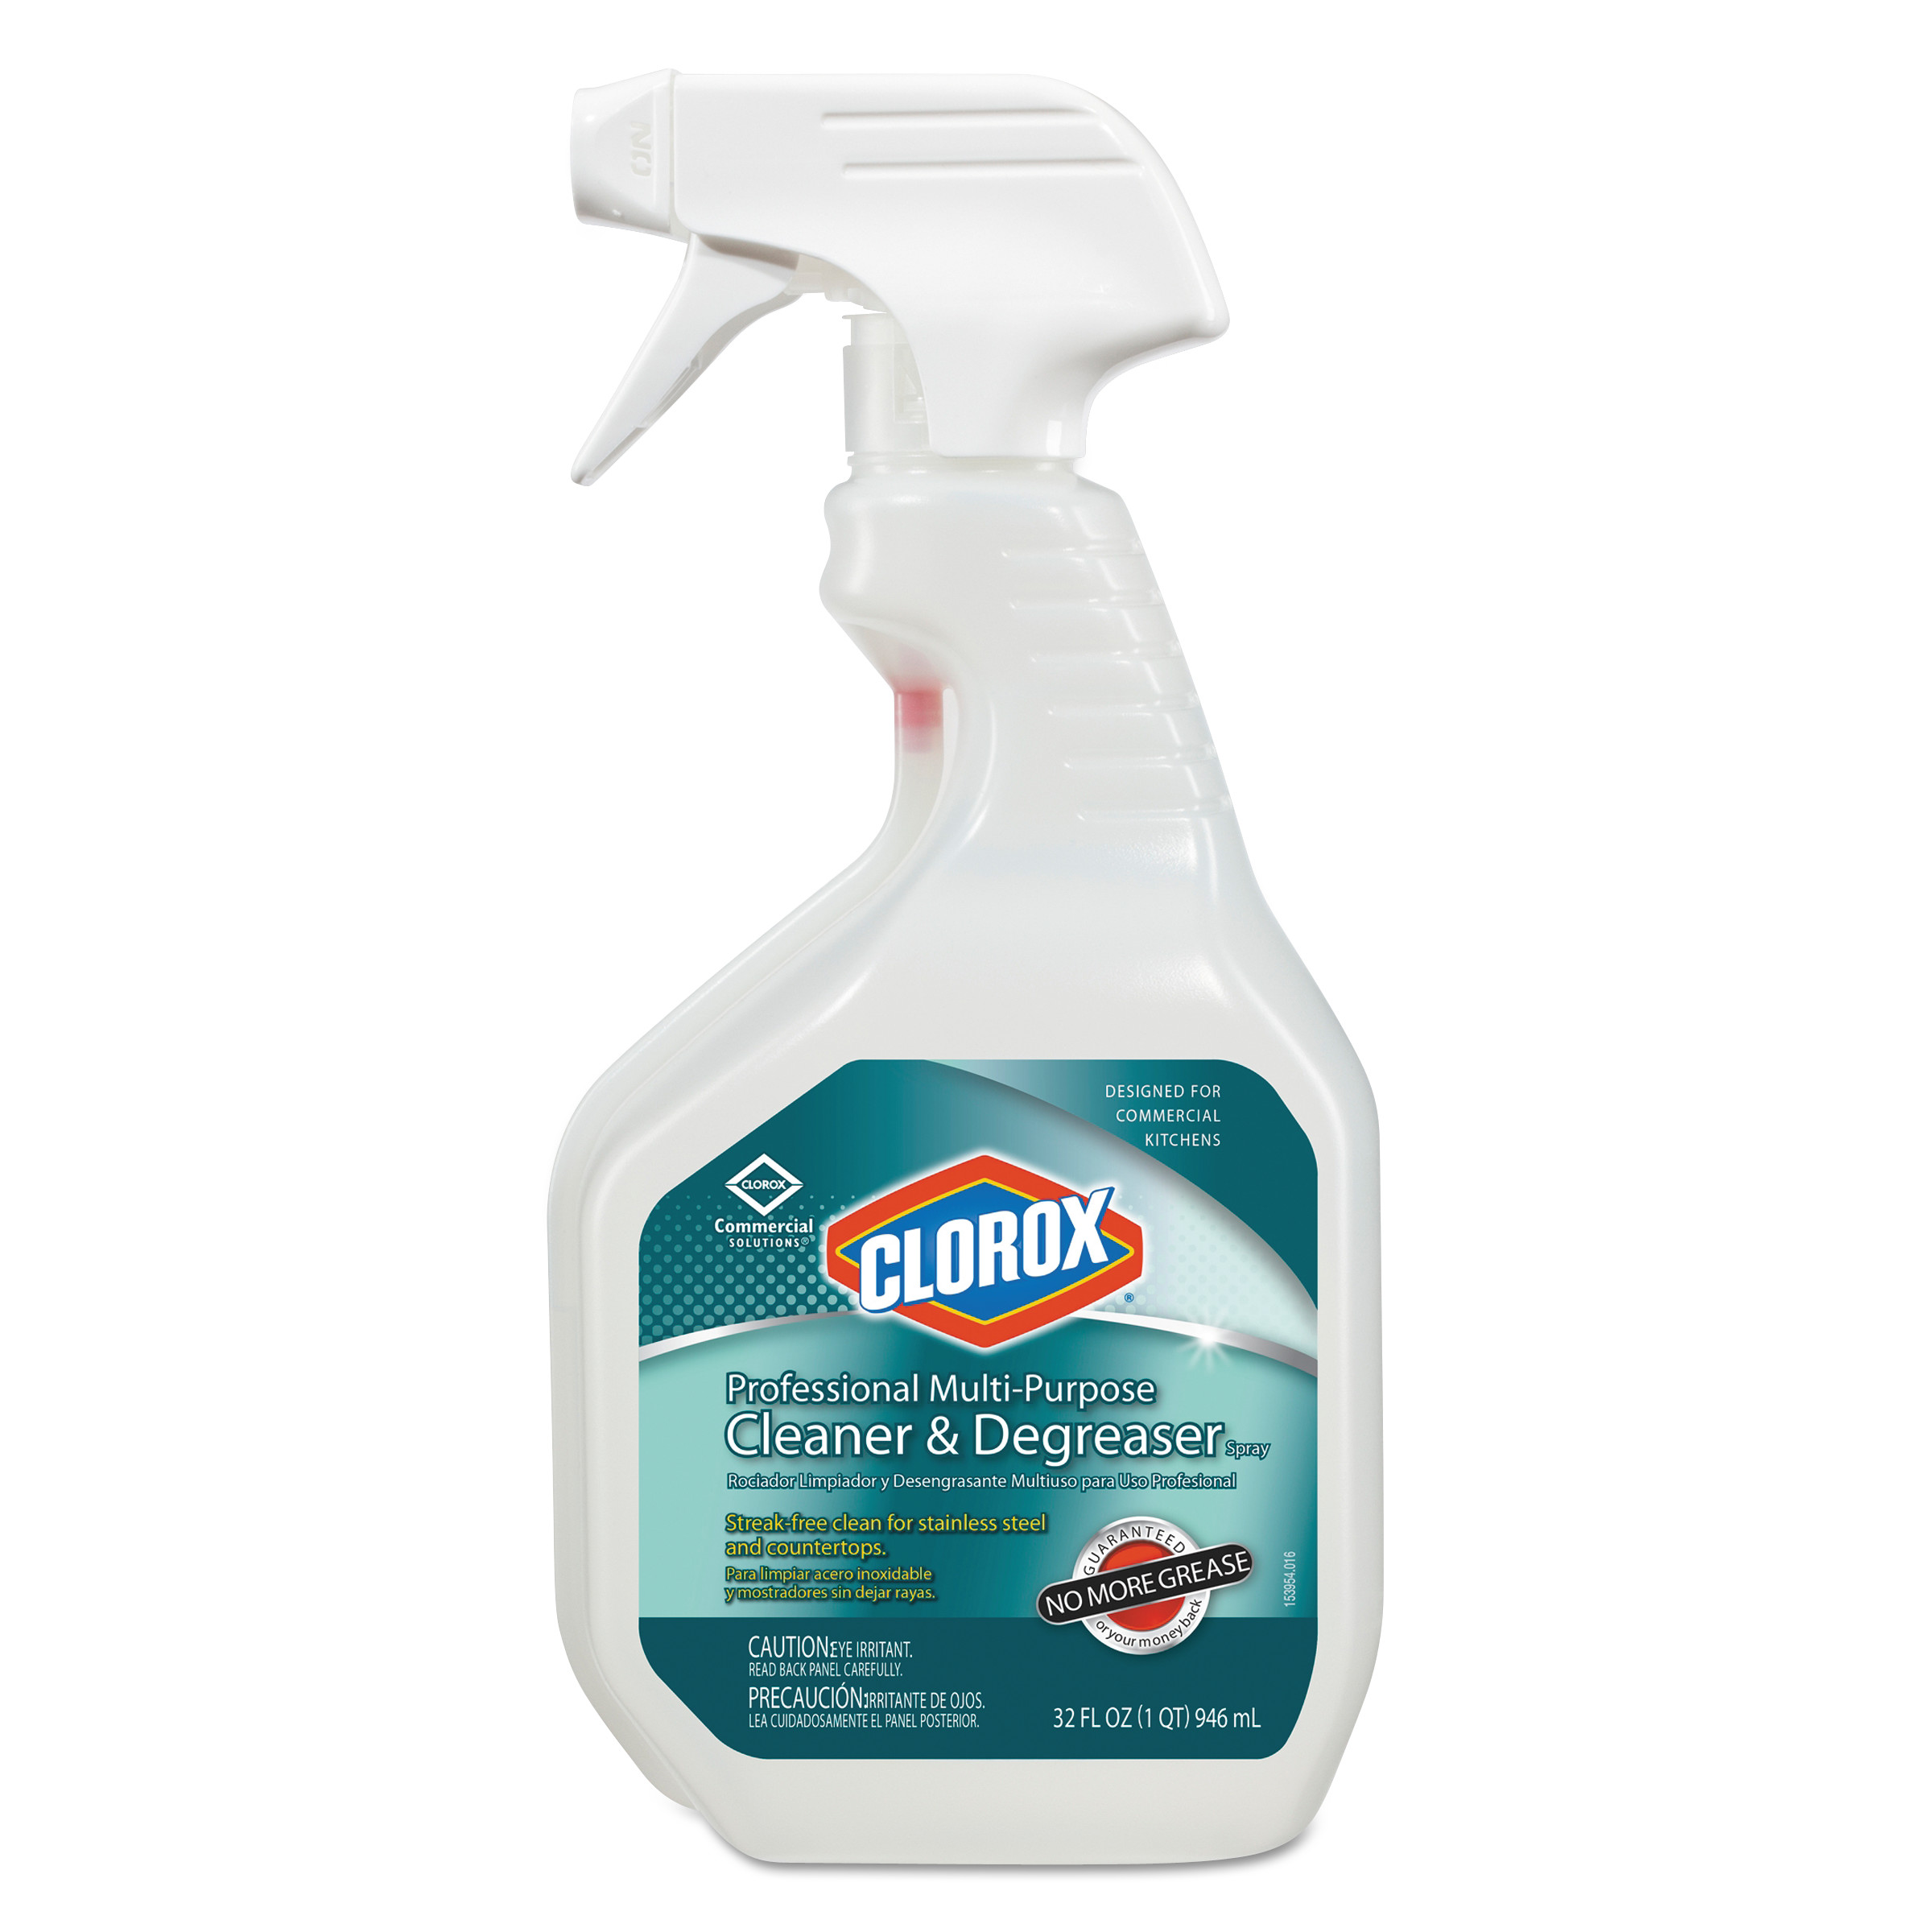  Clorox 30865 Professional Multi-Purpose Cleaner and Degreaser Spray, 32 oz Bottle (CLO30865) 